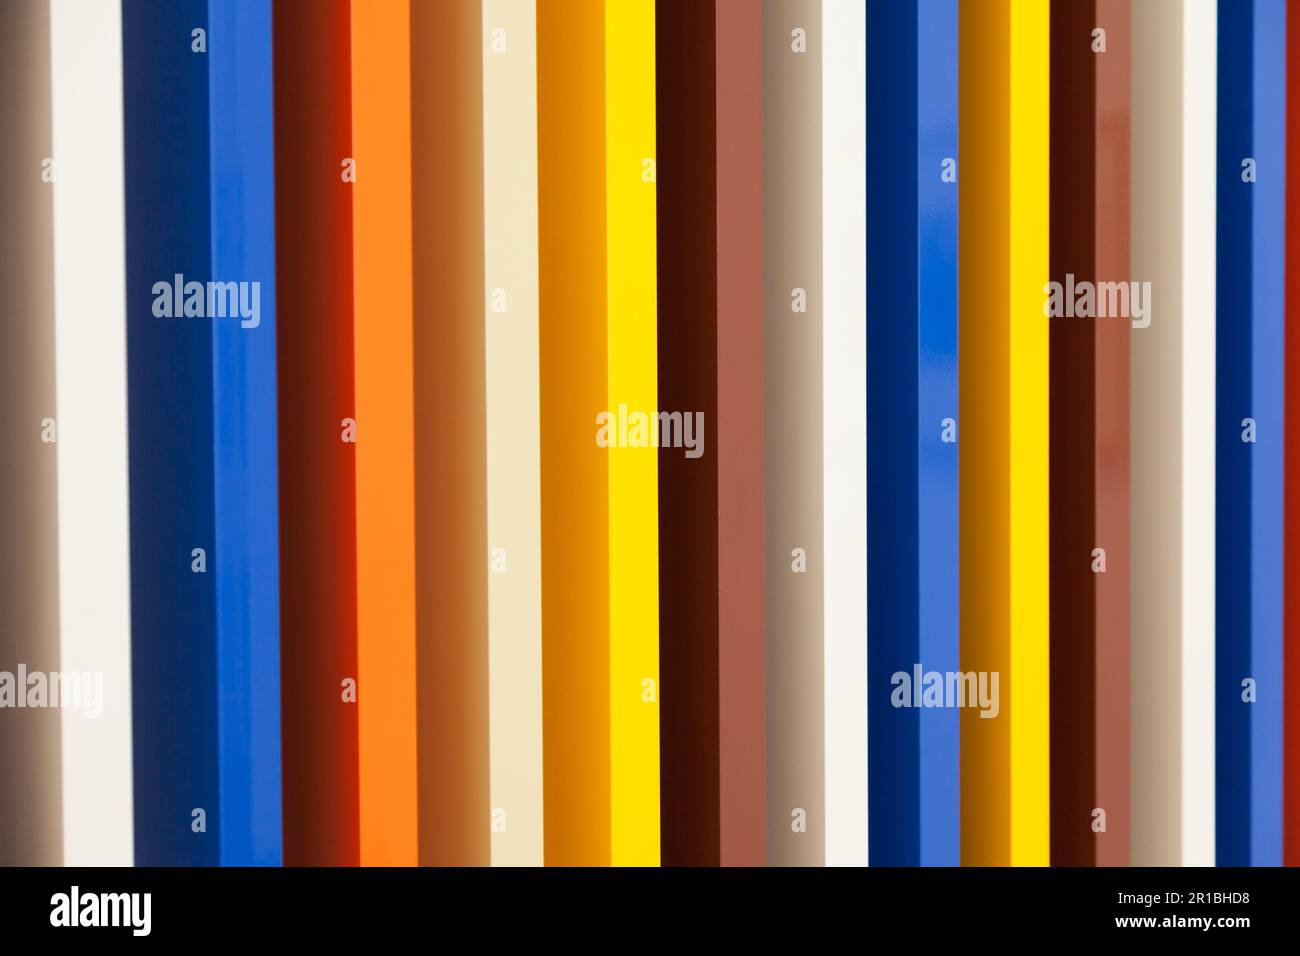 Several colors in prospective painted on wood columns Stock Photo